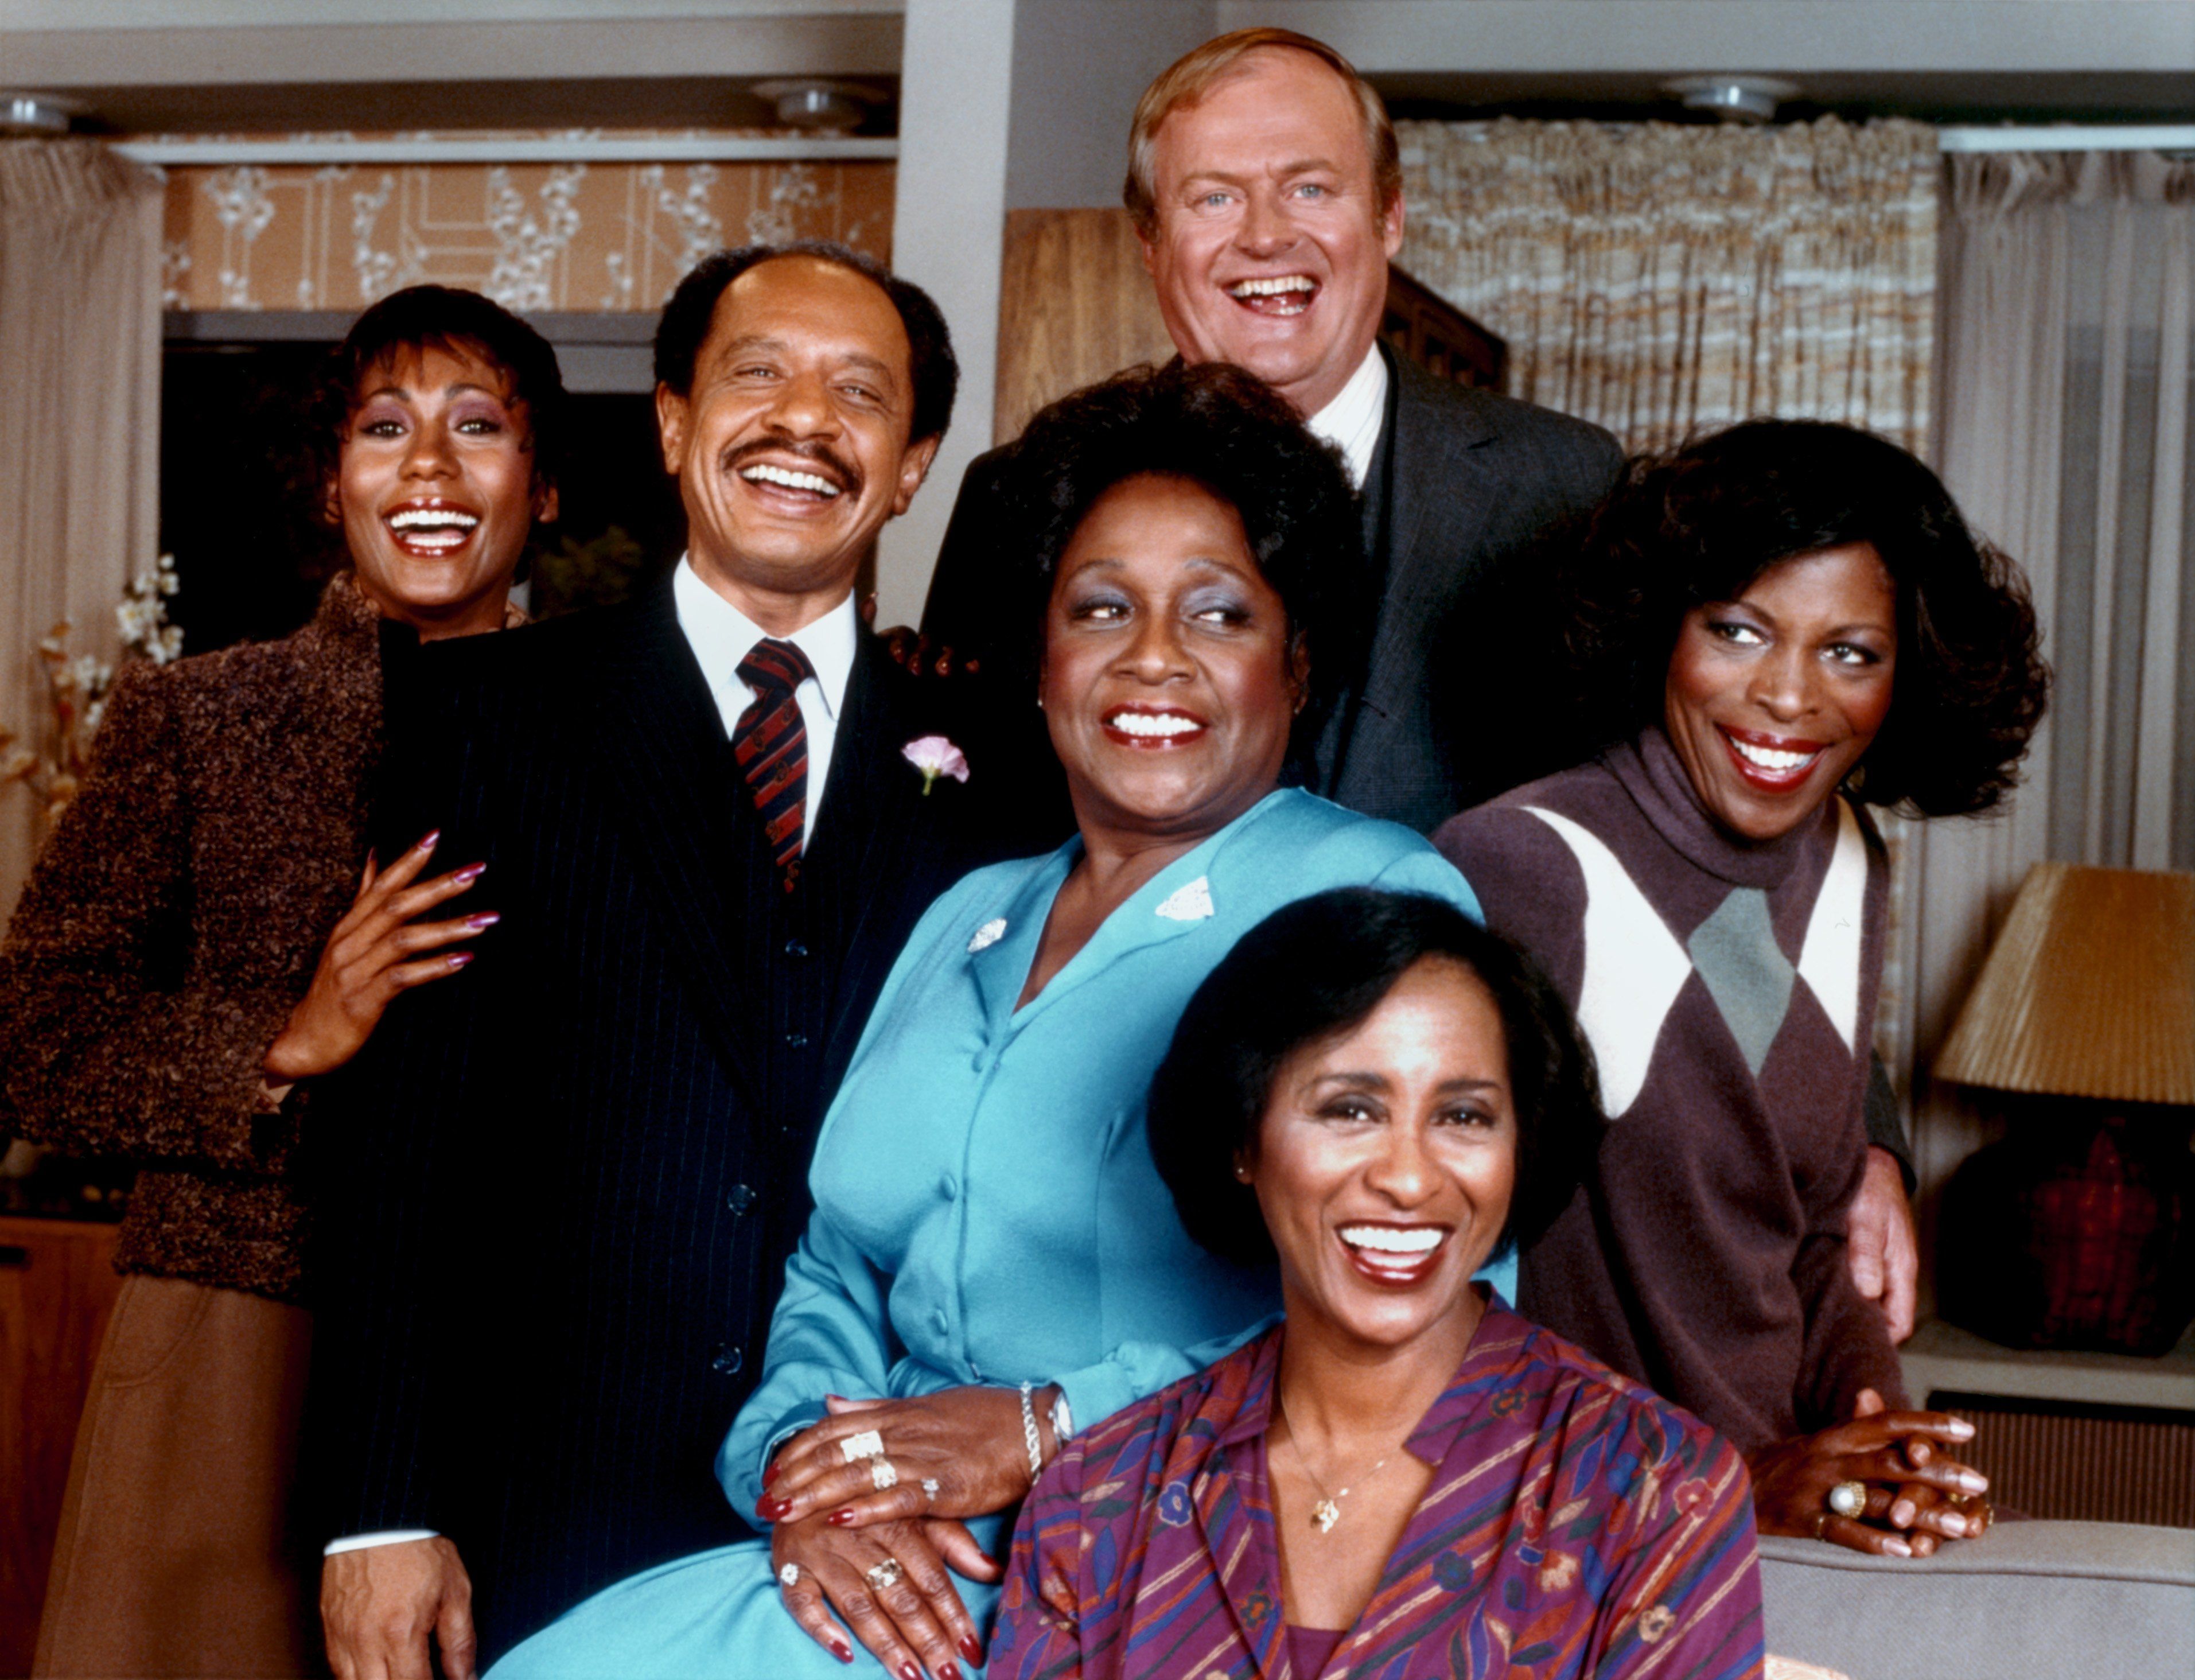 The cast of the Jeffersons in 1975. |Photo: Getty Images